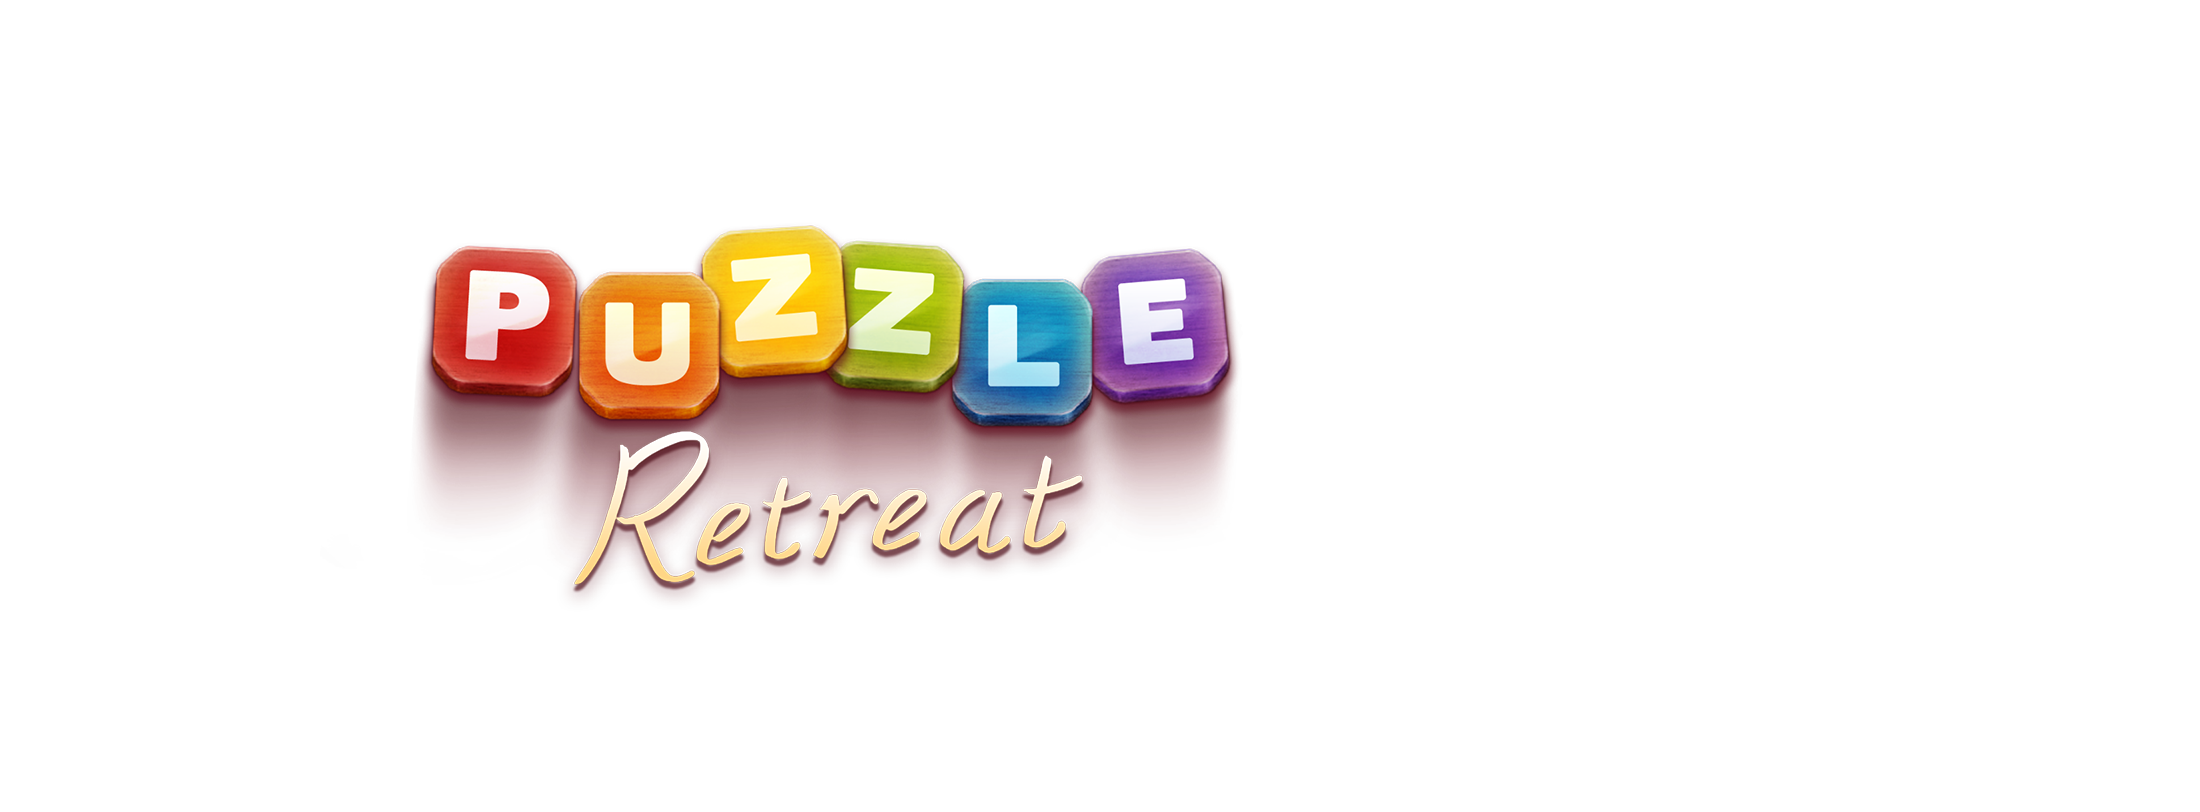 Puzzle Retreat banner image front layer